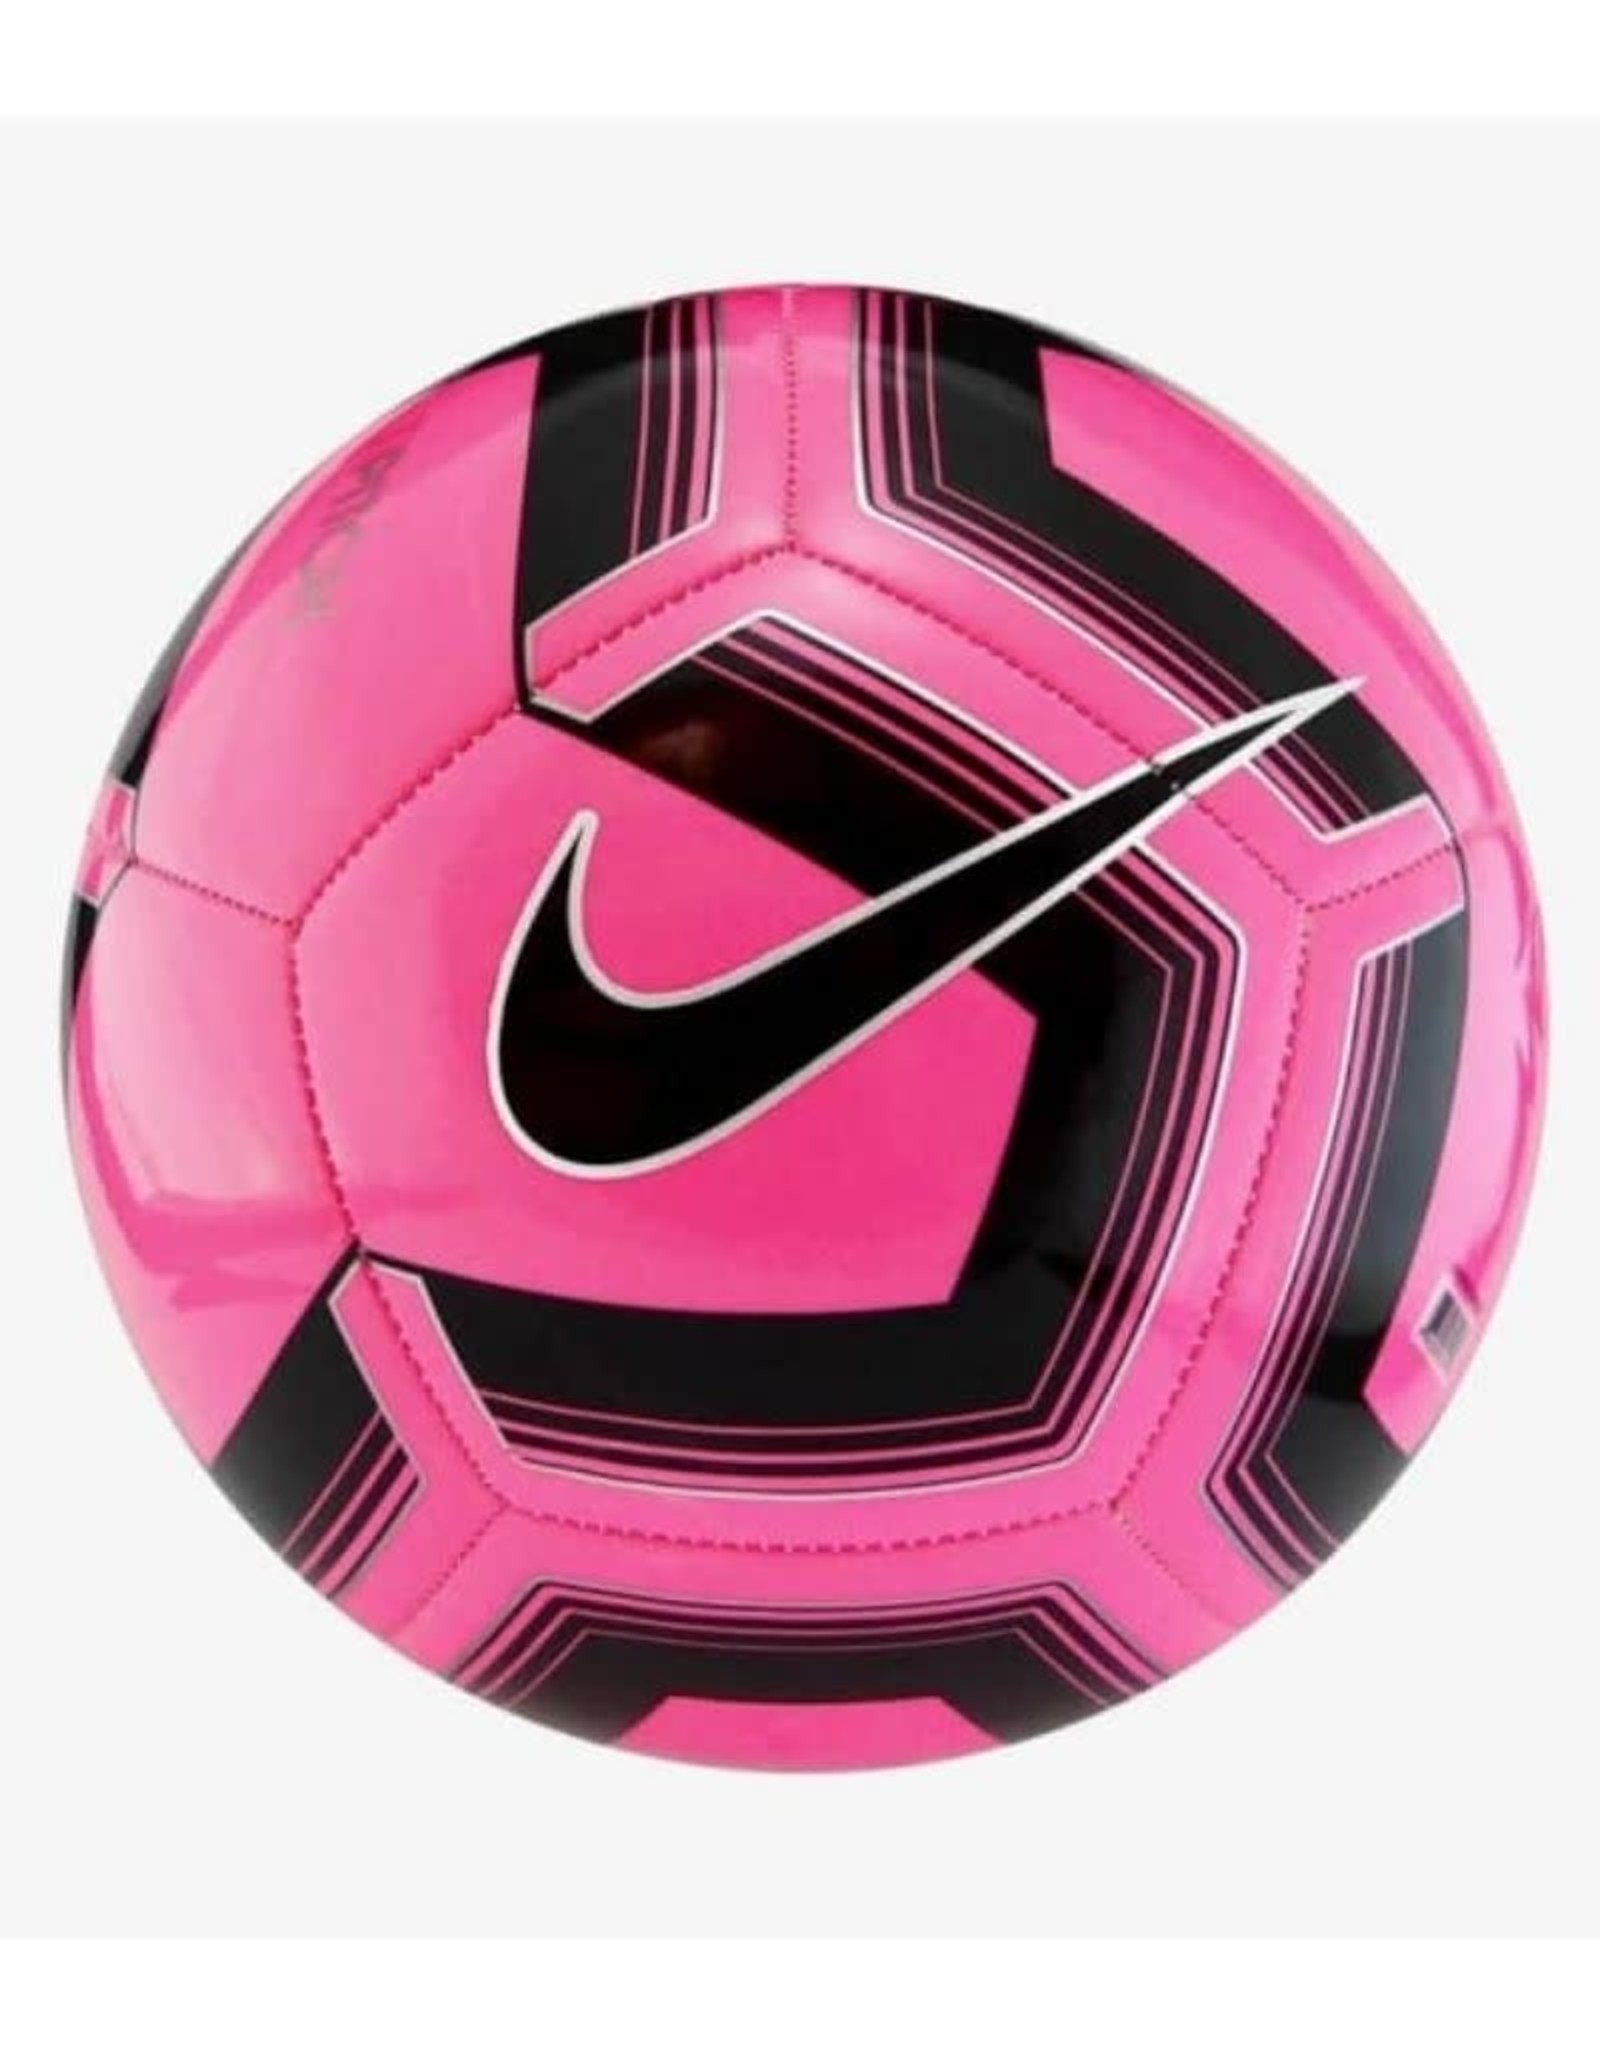 Nike Pitch Training Soccer Ball Pink 5 That Pro Look